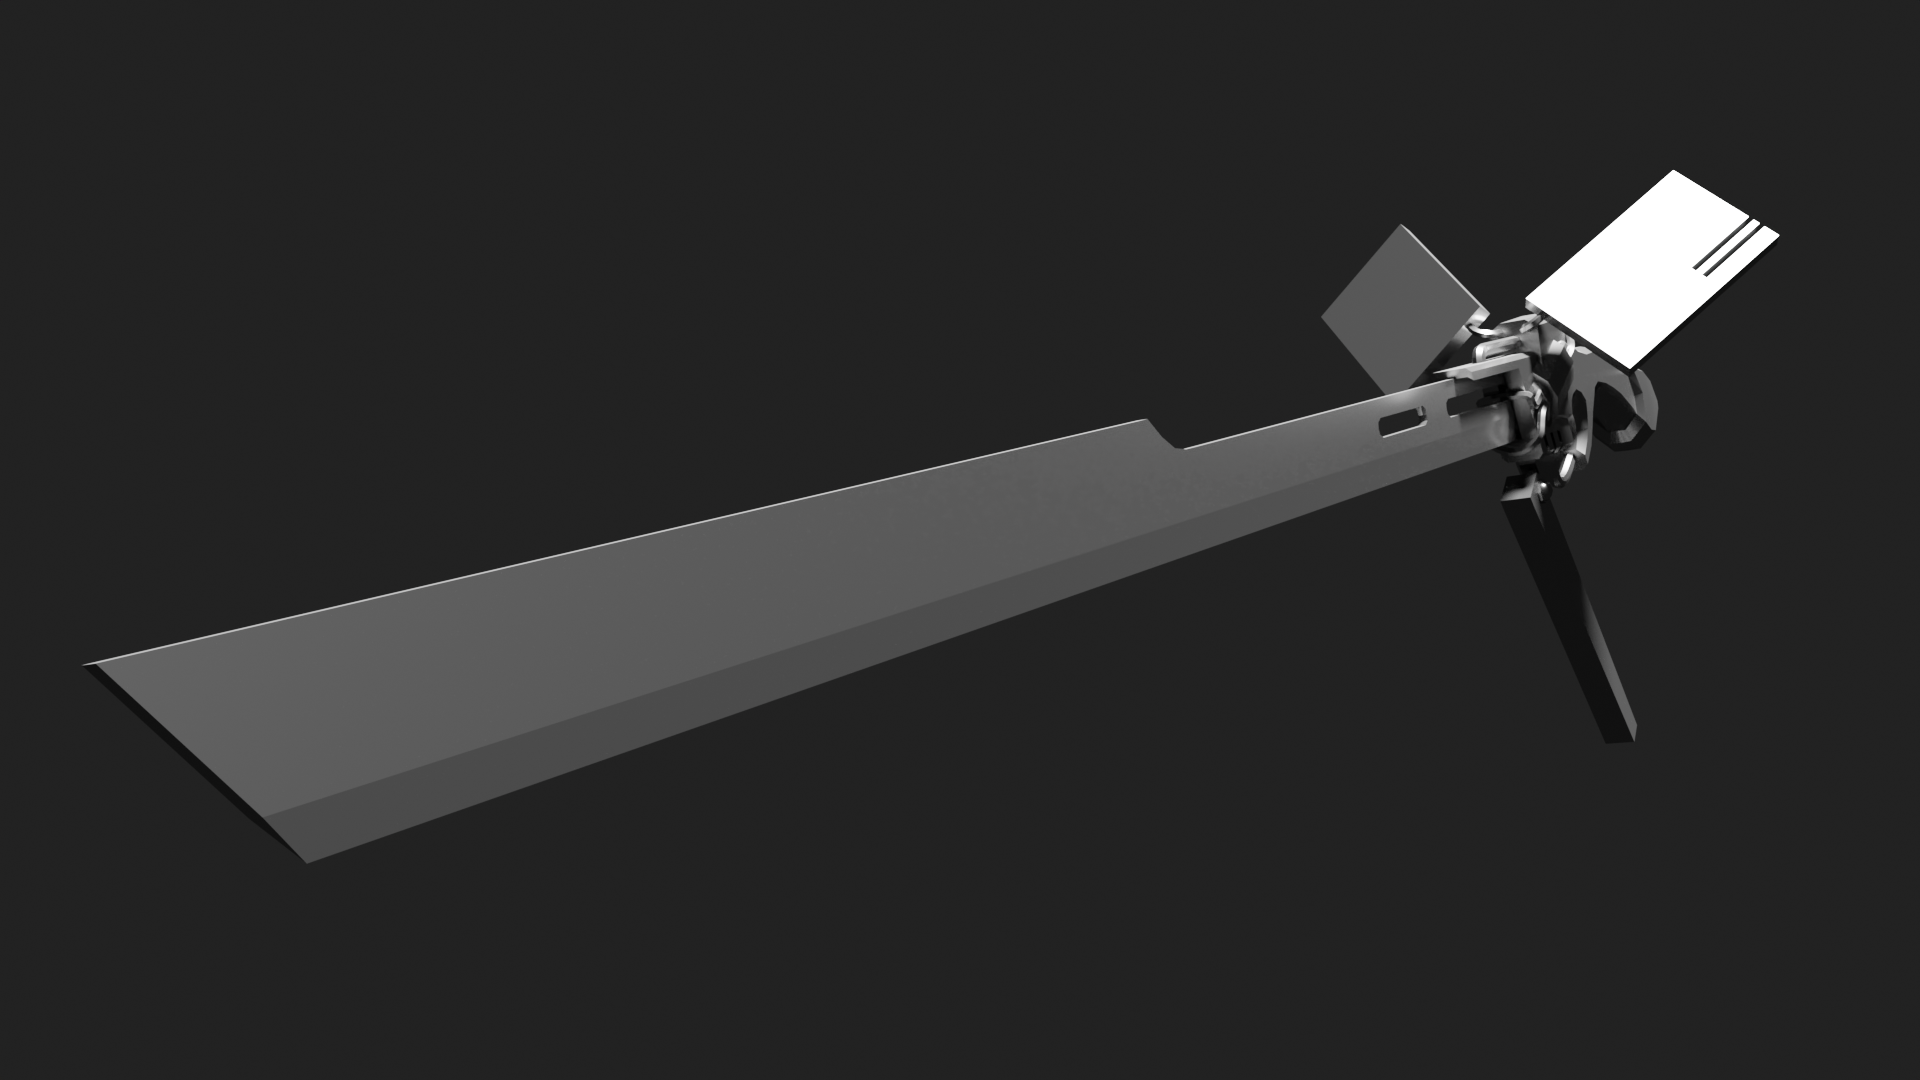 A Blender Cycles render of the whole sword, angled to show mainly the blade.